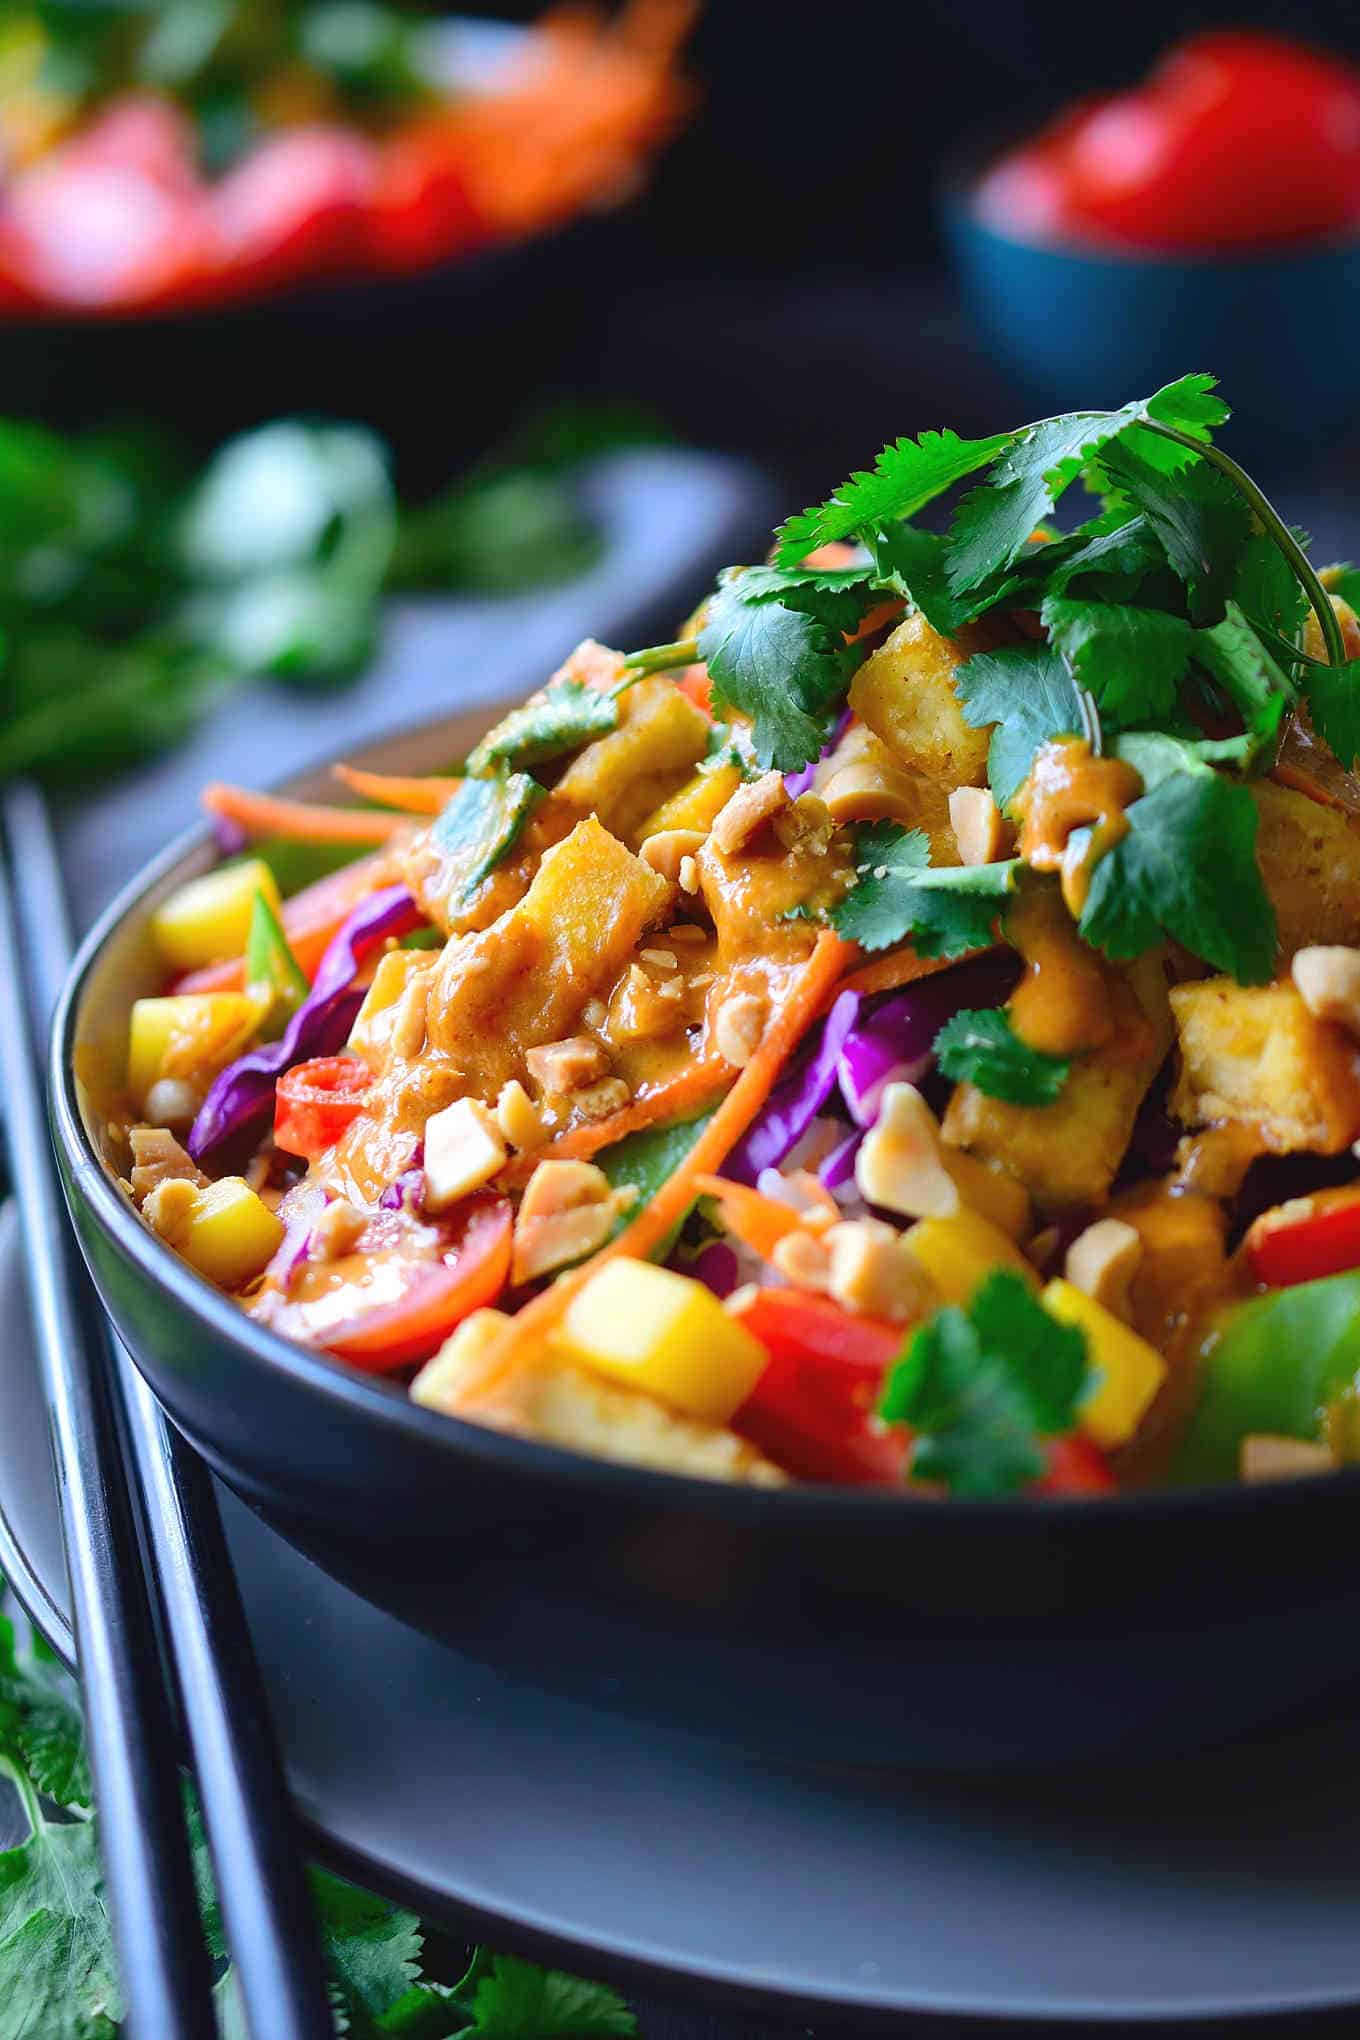 This Thai Buddha bowl is quick and easy to put together with heaps of fresh vegetables and crispy fried tofu served over coconut rice and topped off with a simple Thai peanut sauce with spicy red curry. Great for a weeknight dinner, these bowls come together in just 15 minutes!